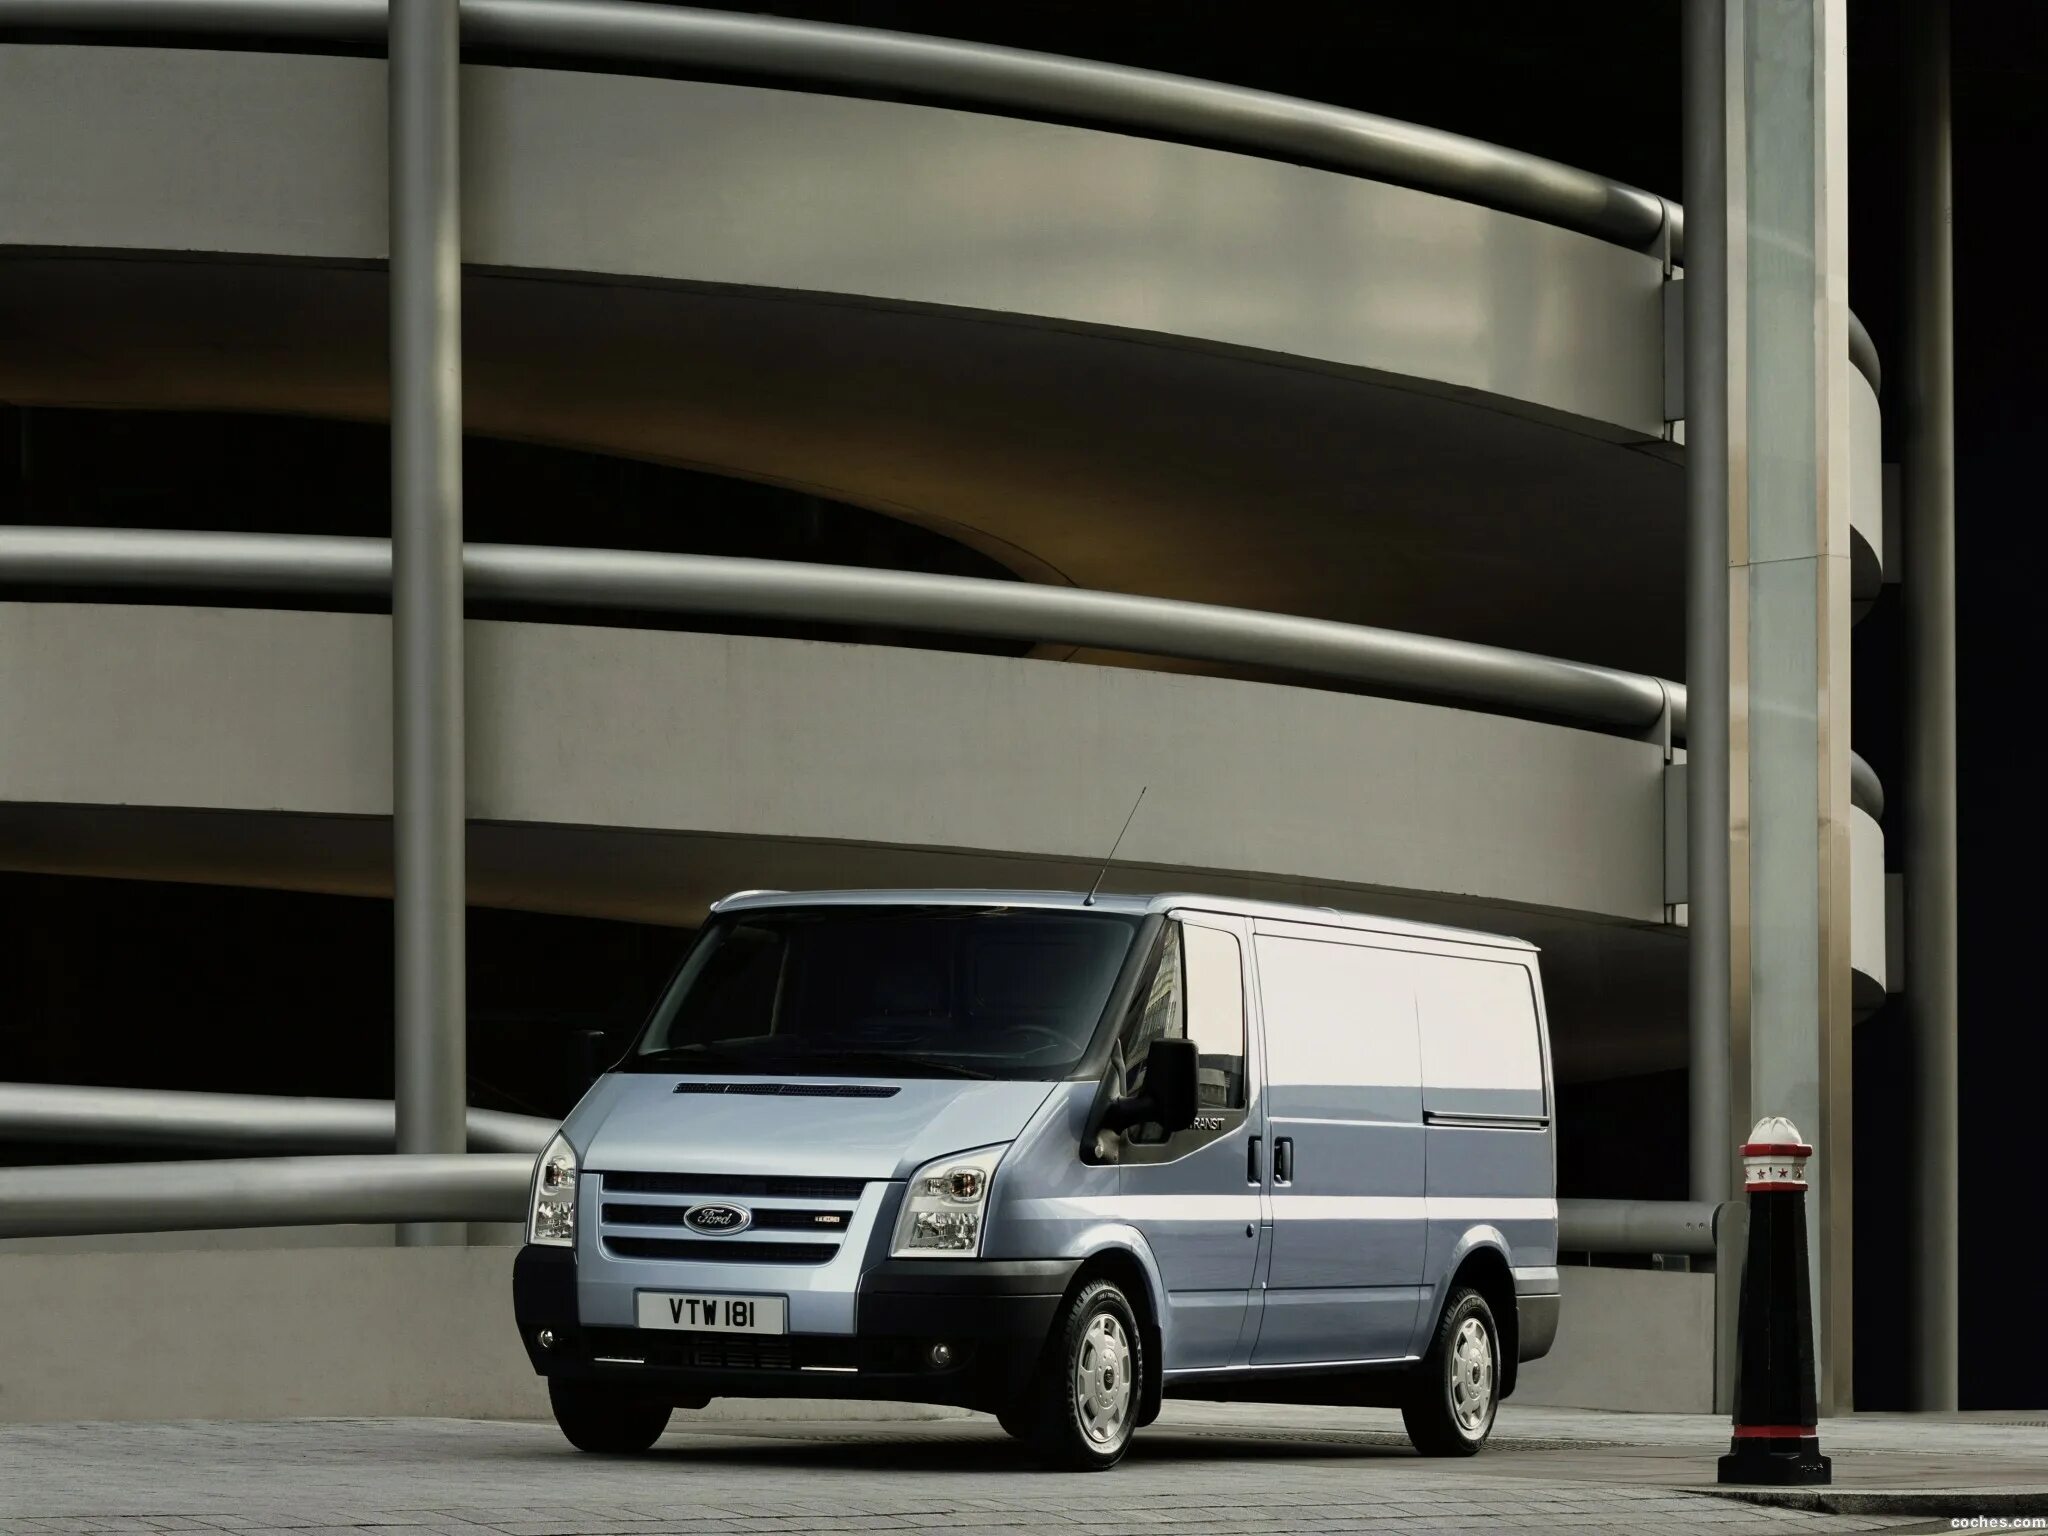 Форд транзит 2006 2014. Ford Transit 2006. Ford Transit van 2006. Ford Transit SWB. Ford Transit 06.